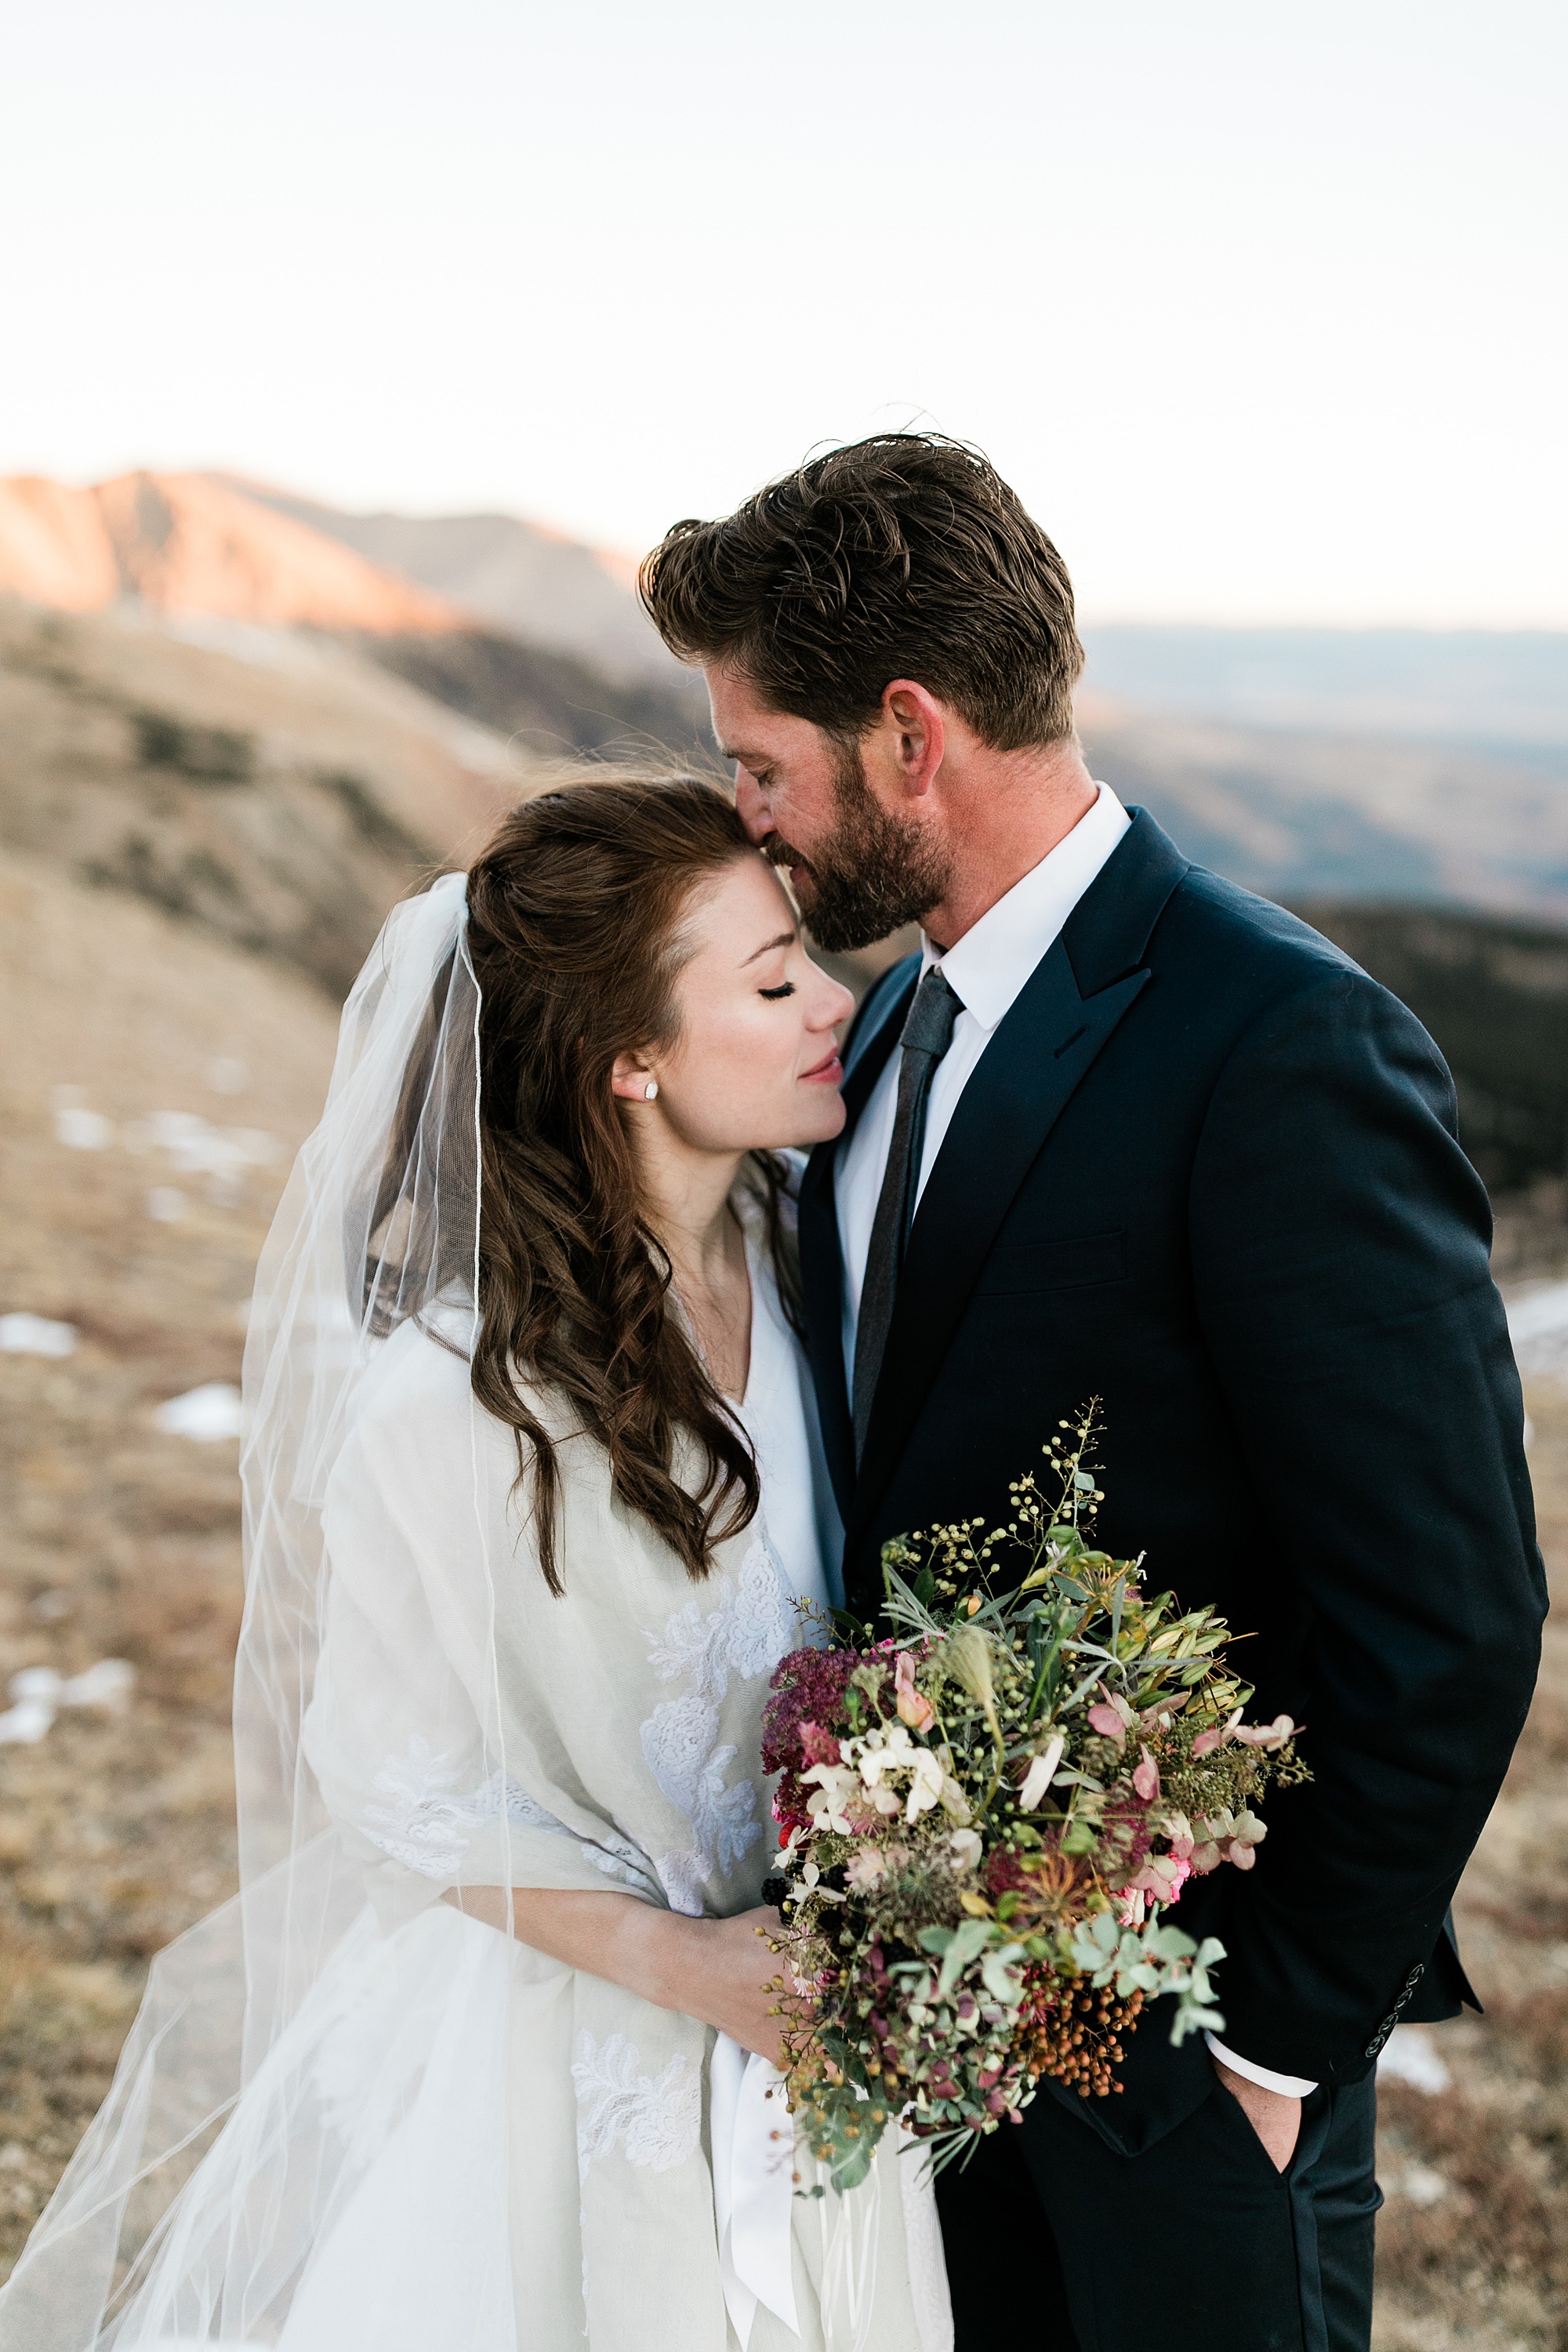 groom kissing bride on forehead on mountain top